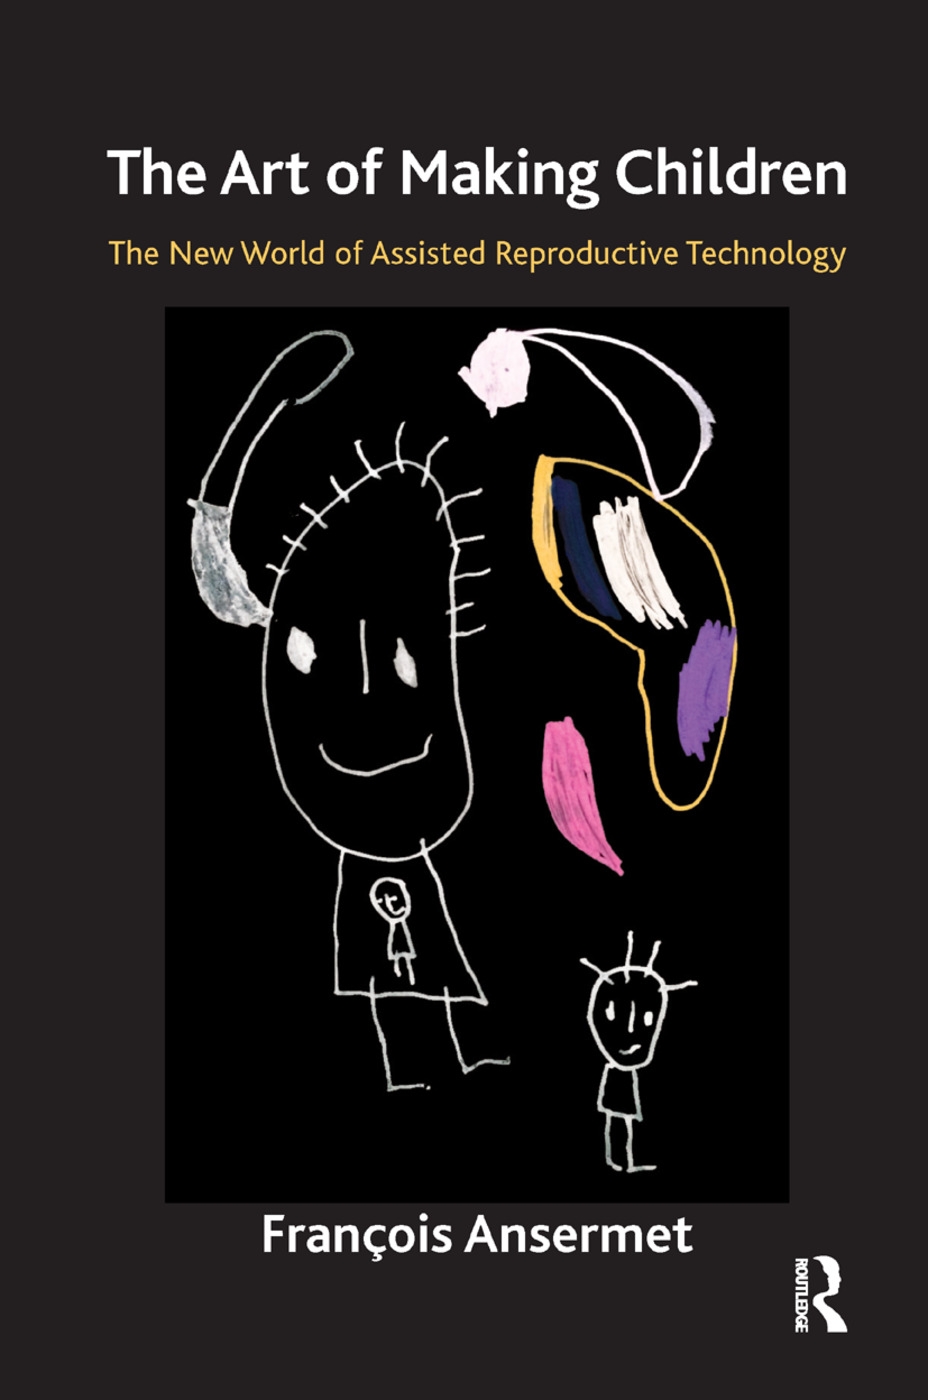 The Art of Making Children: The New World of Assisted Reproductive Technology